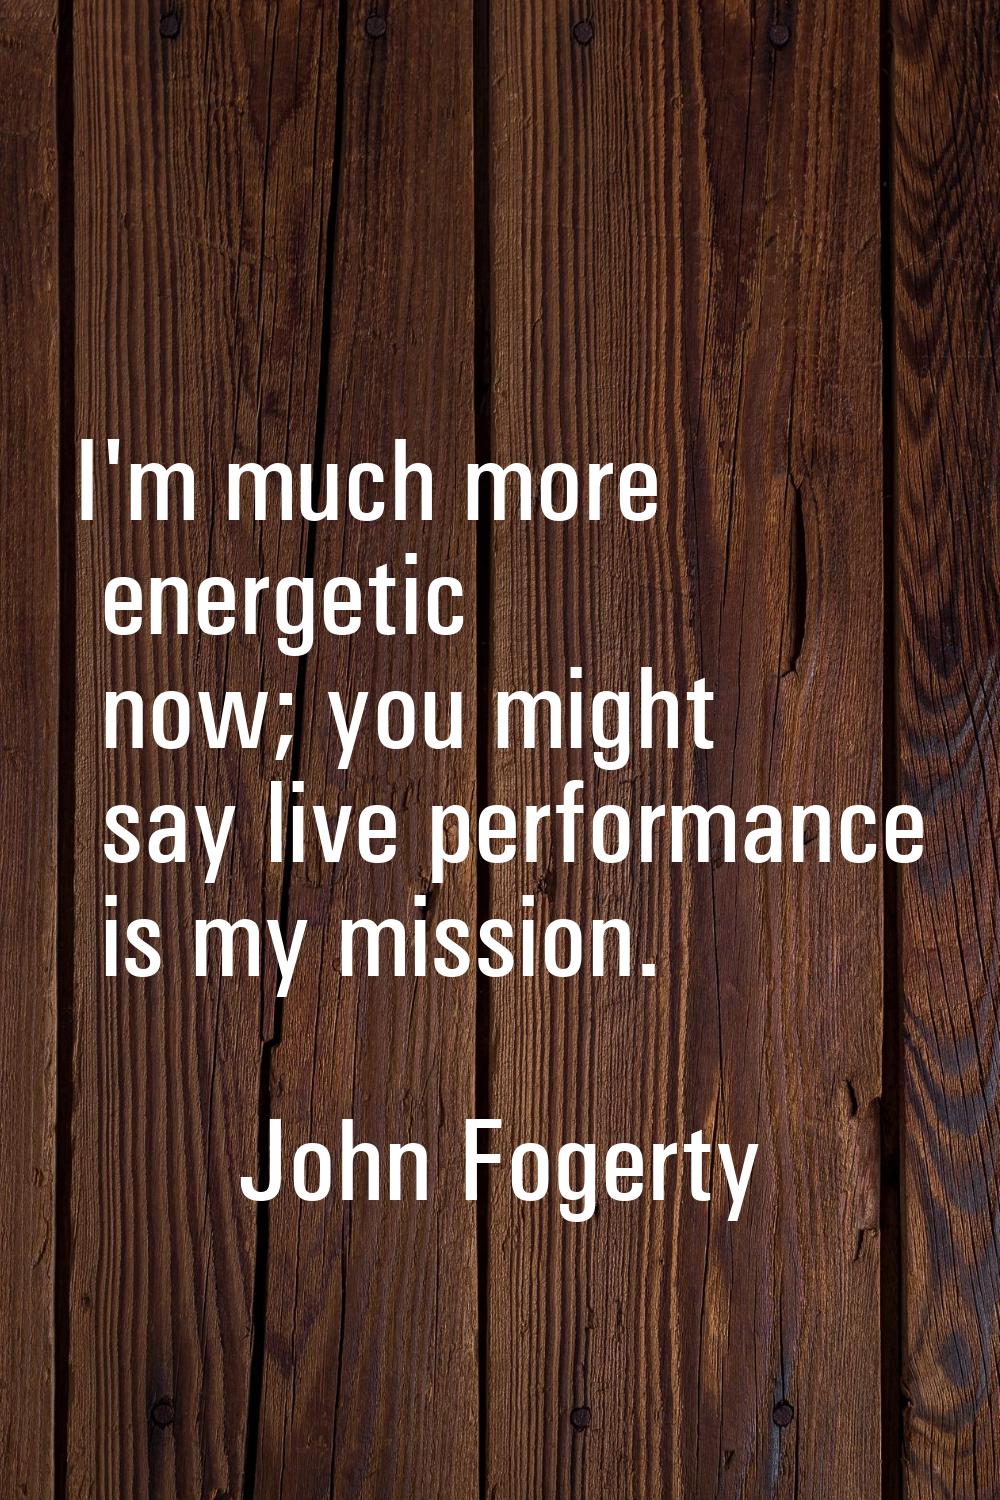 I'm much more energetic now; you might say live performance is my mission.